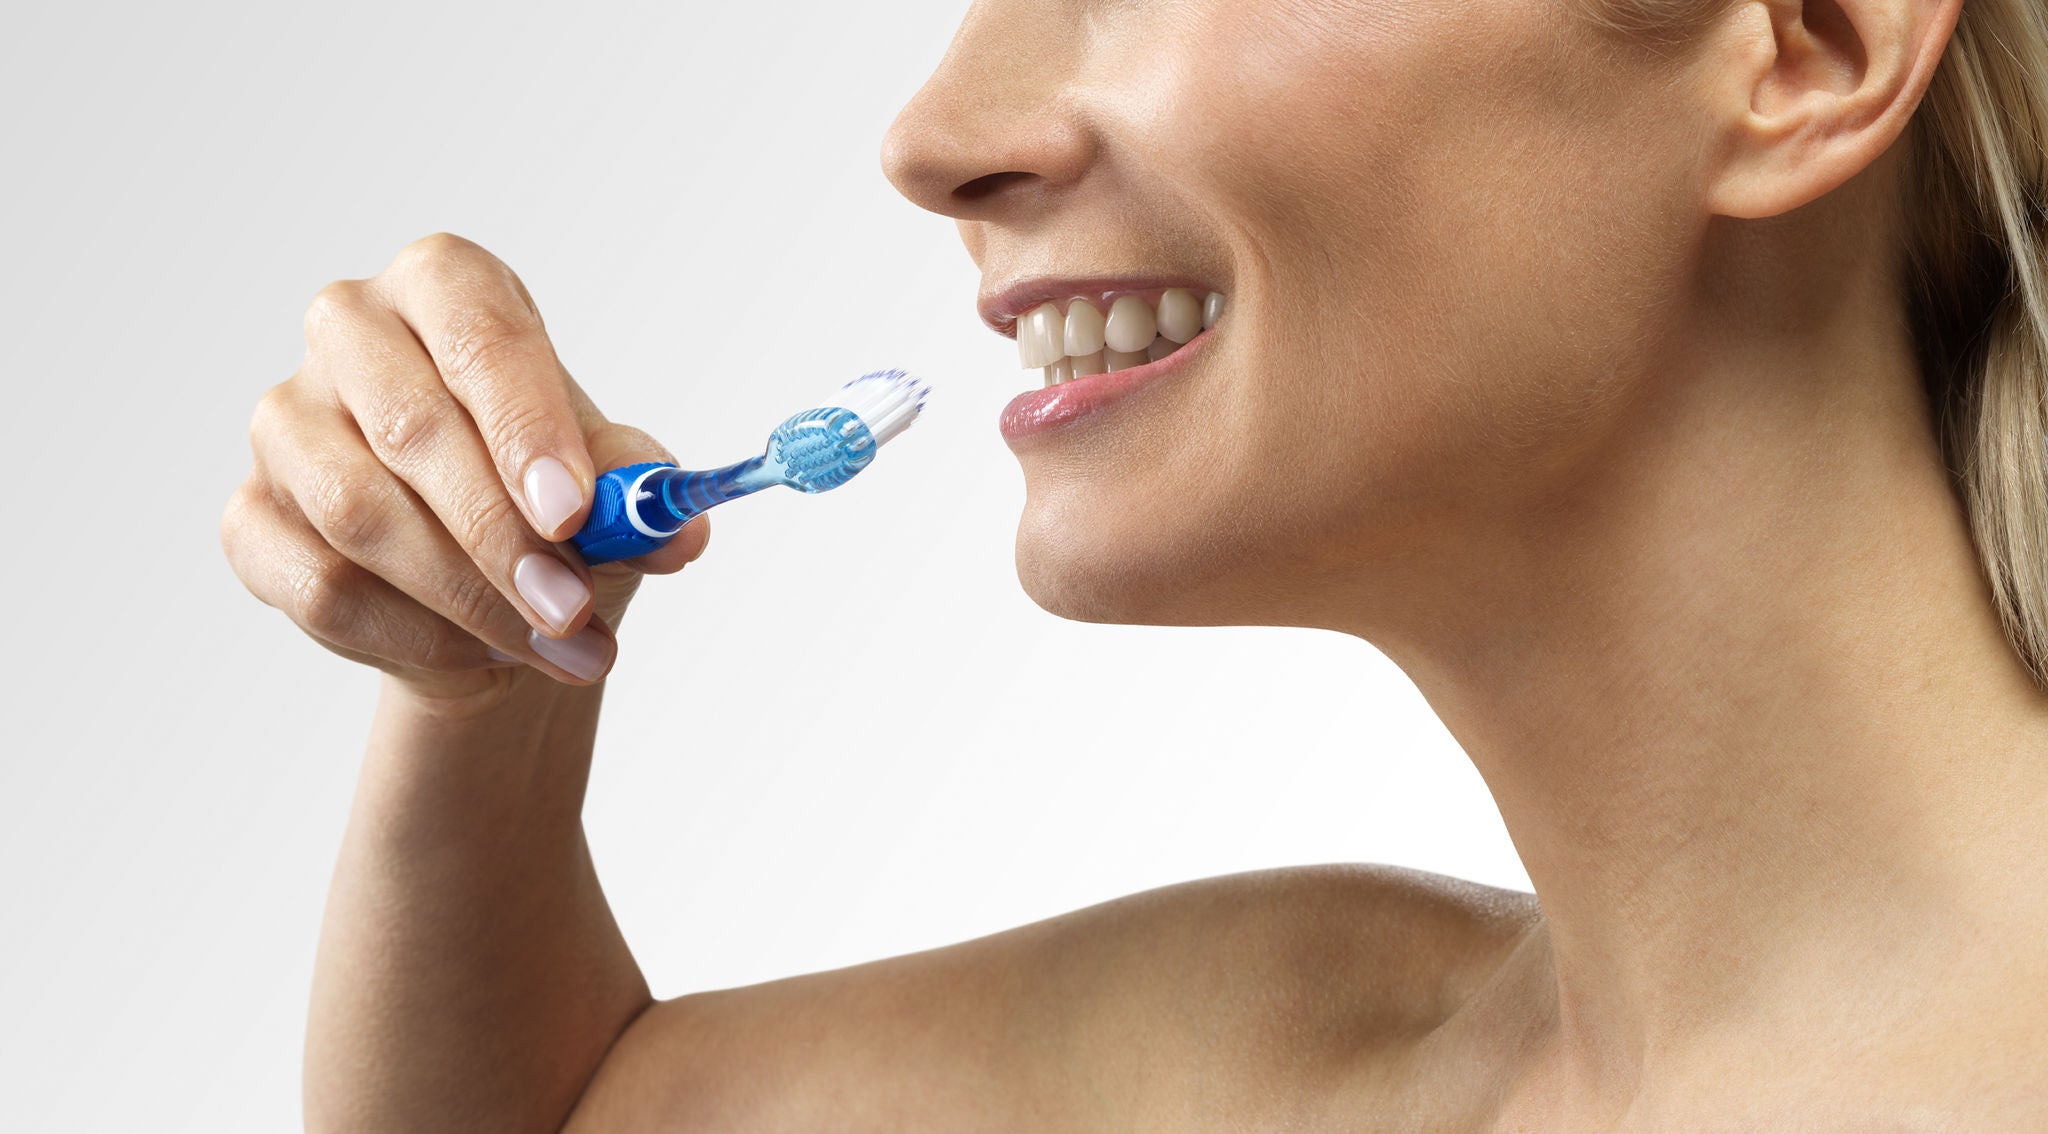 Woman smiling while is showing how to use the GUM PRO toothbrush